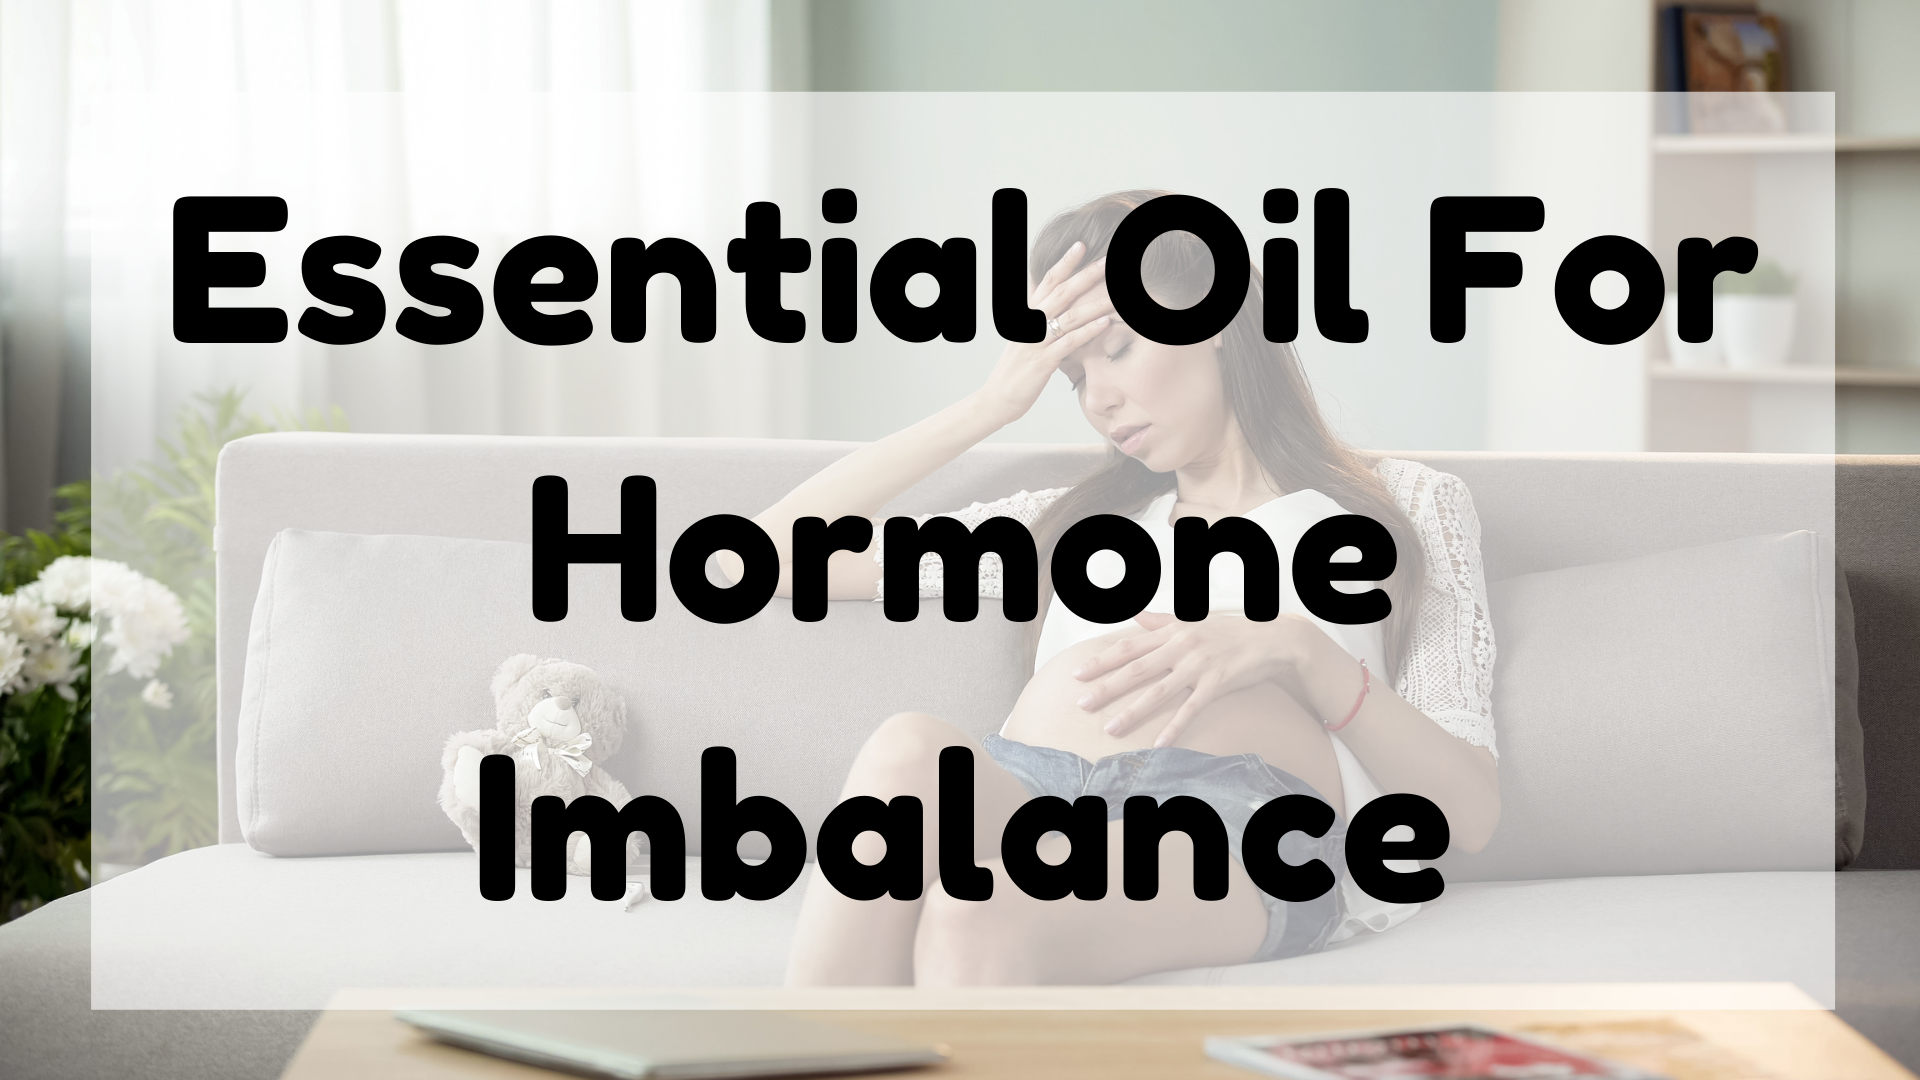 Essential Oil For Hormone Imbalance